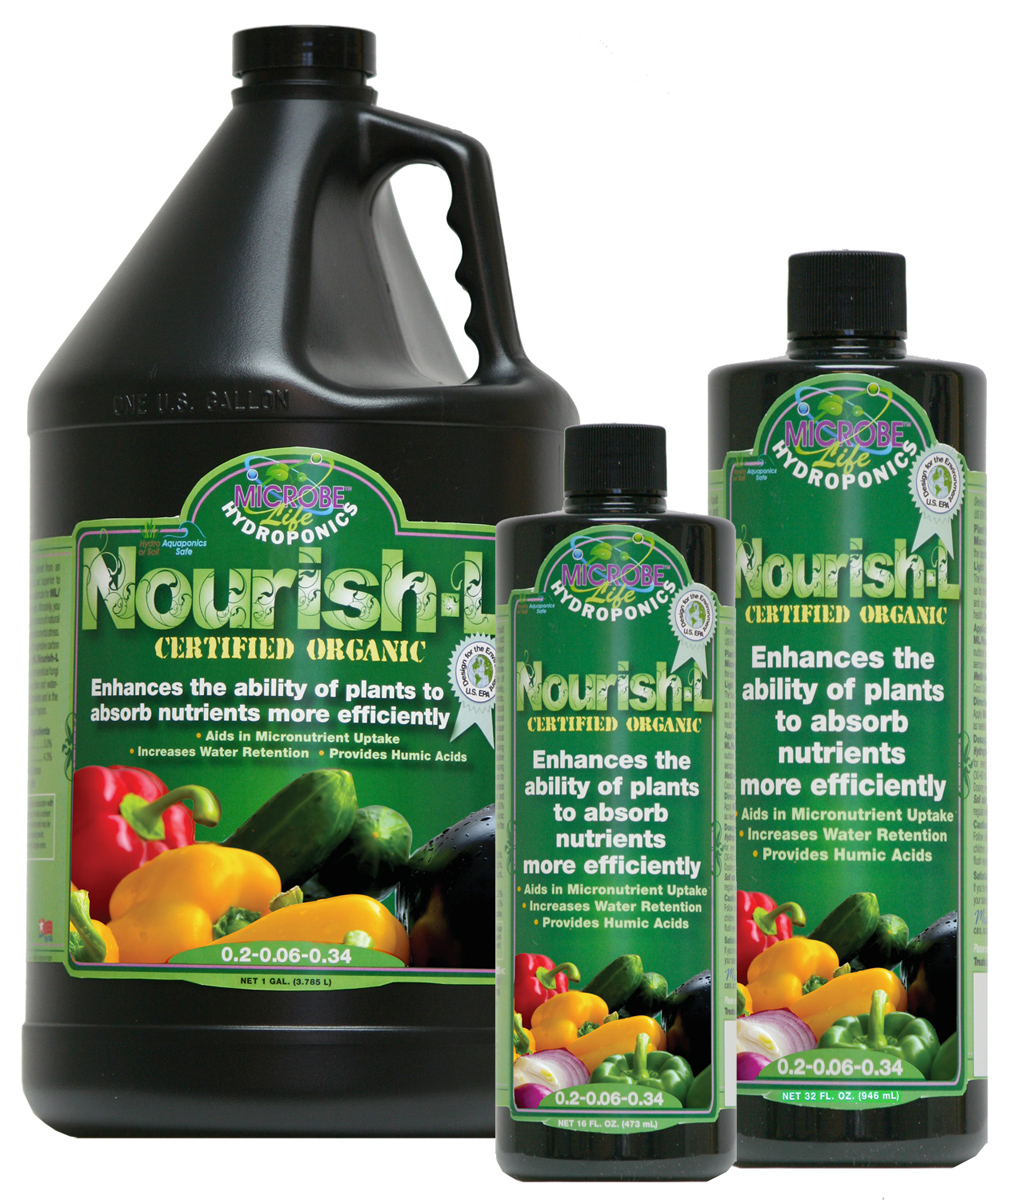 Picture for Microbe Life Nourish-L (Certified Organic), 1 qt